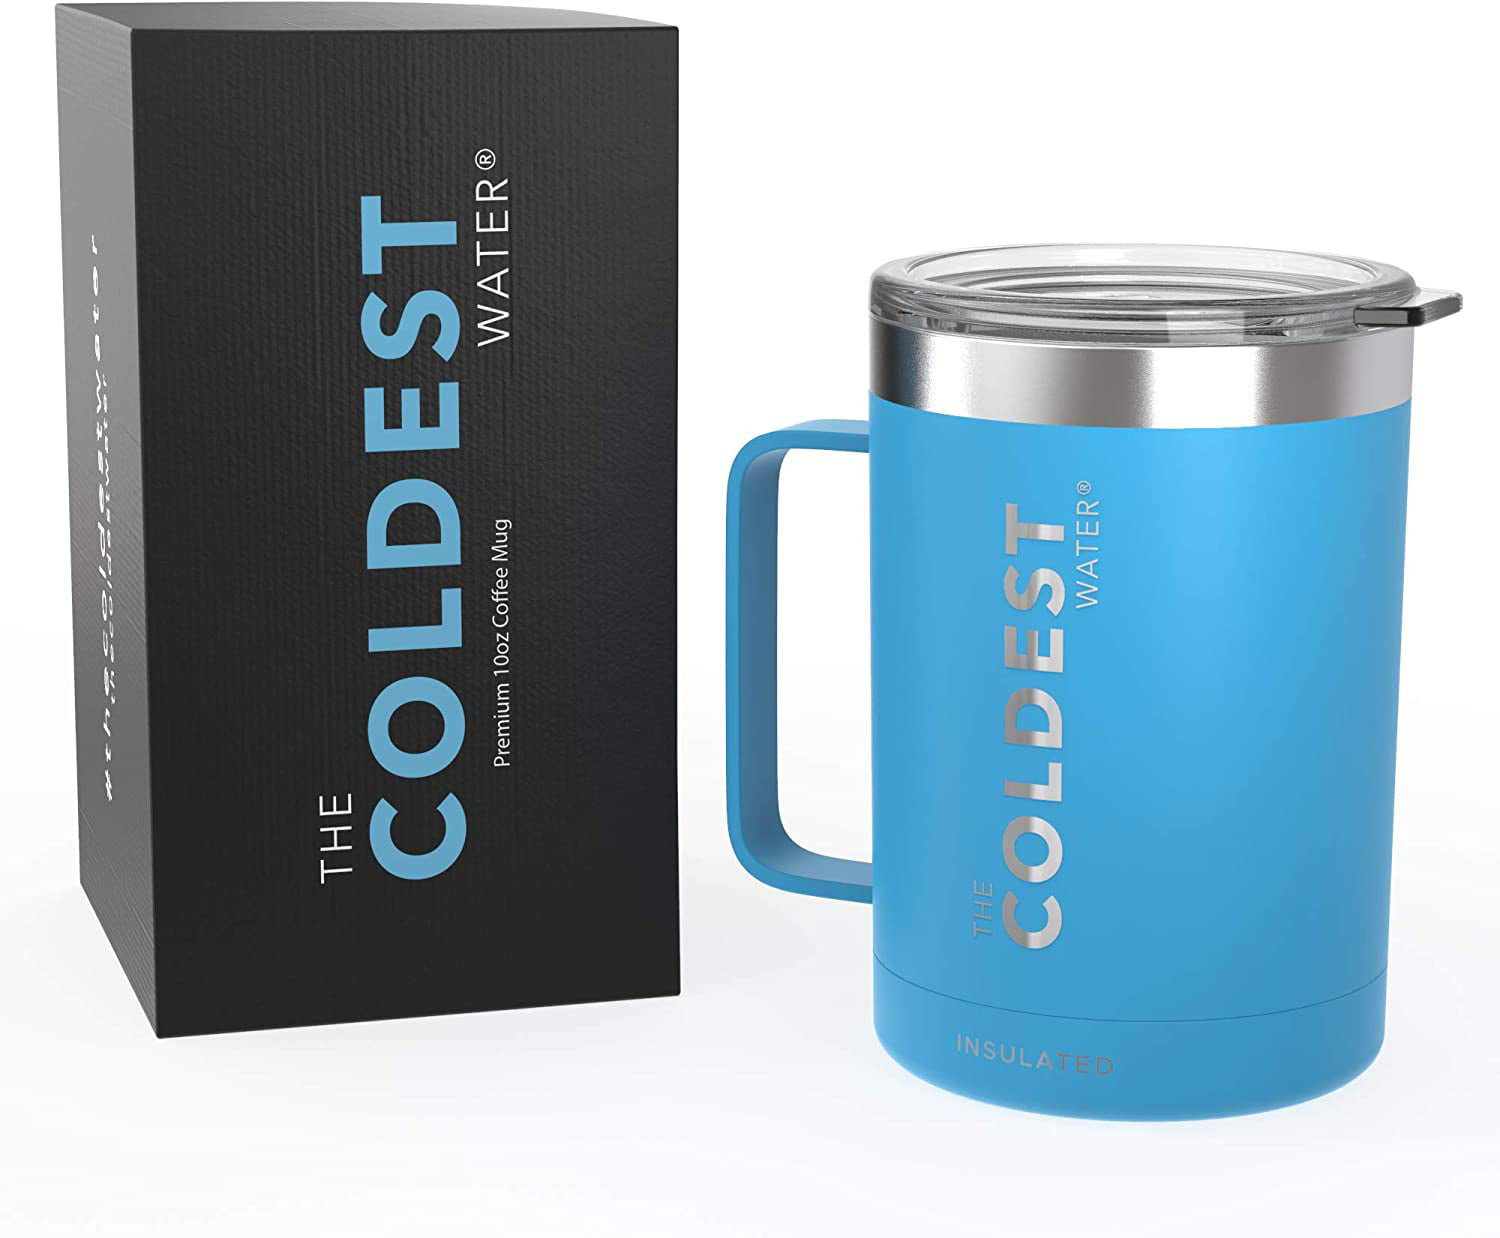 The Coldest Coffee Mug - Stainless Steel Super Insulated Travel